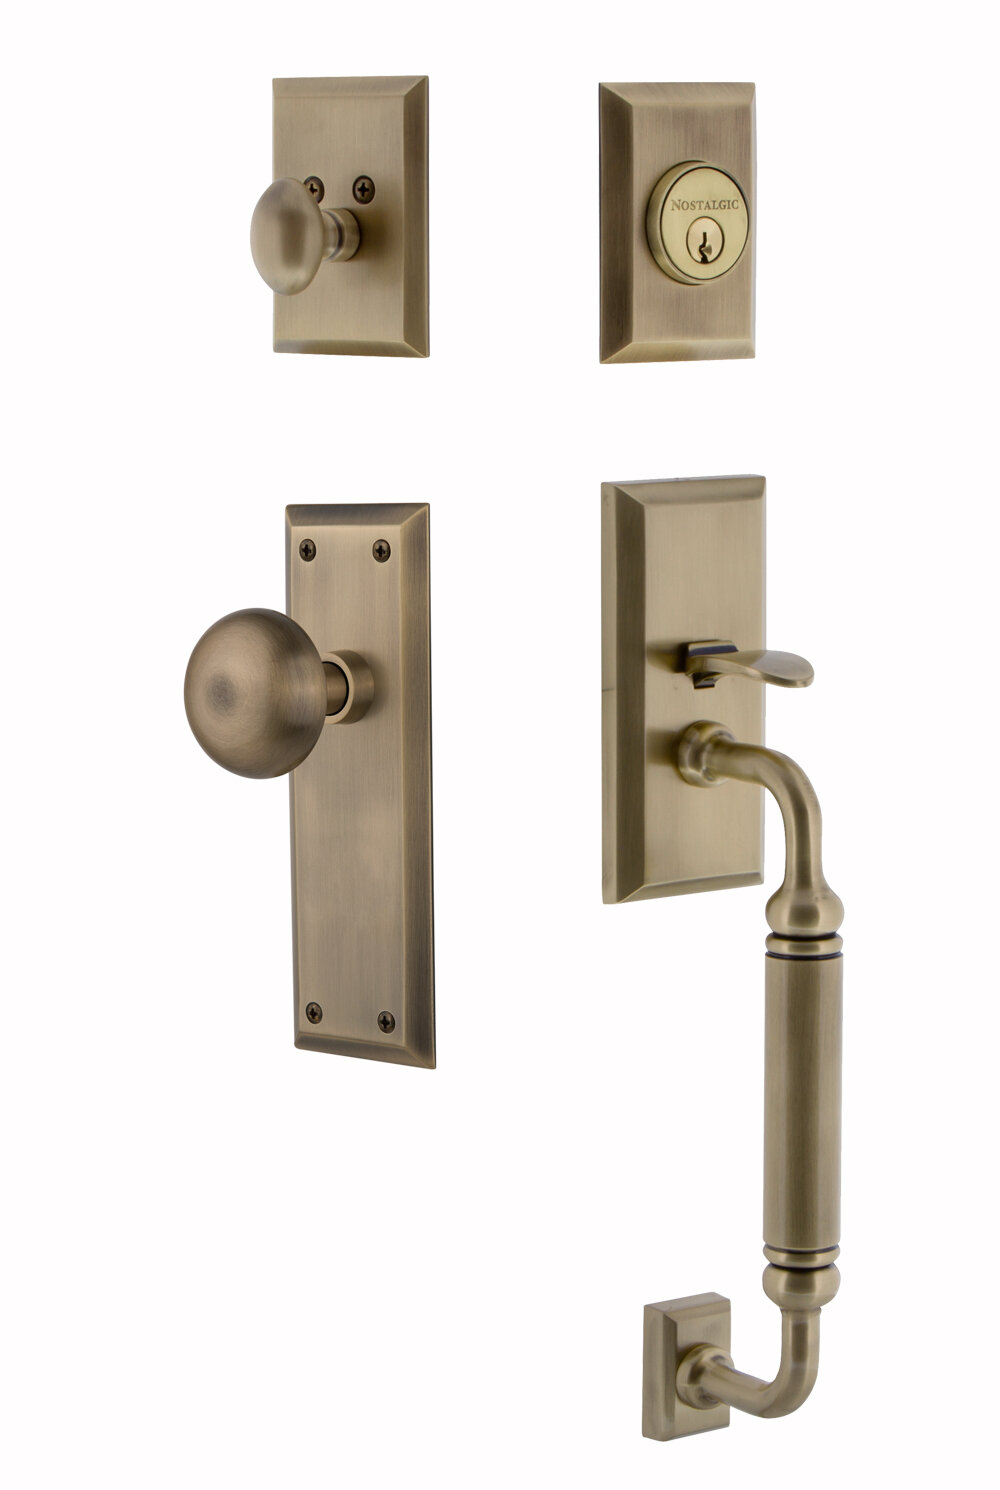 MORTISE LOCK PRIVACY LOCKSET WITH BRASS DOOR KNOBS WITH BRASS BASE VINTAGE STYLE 